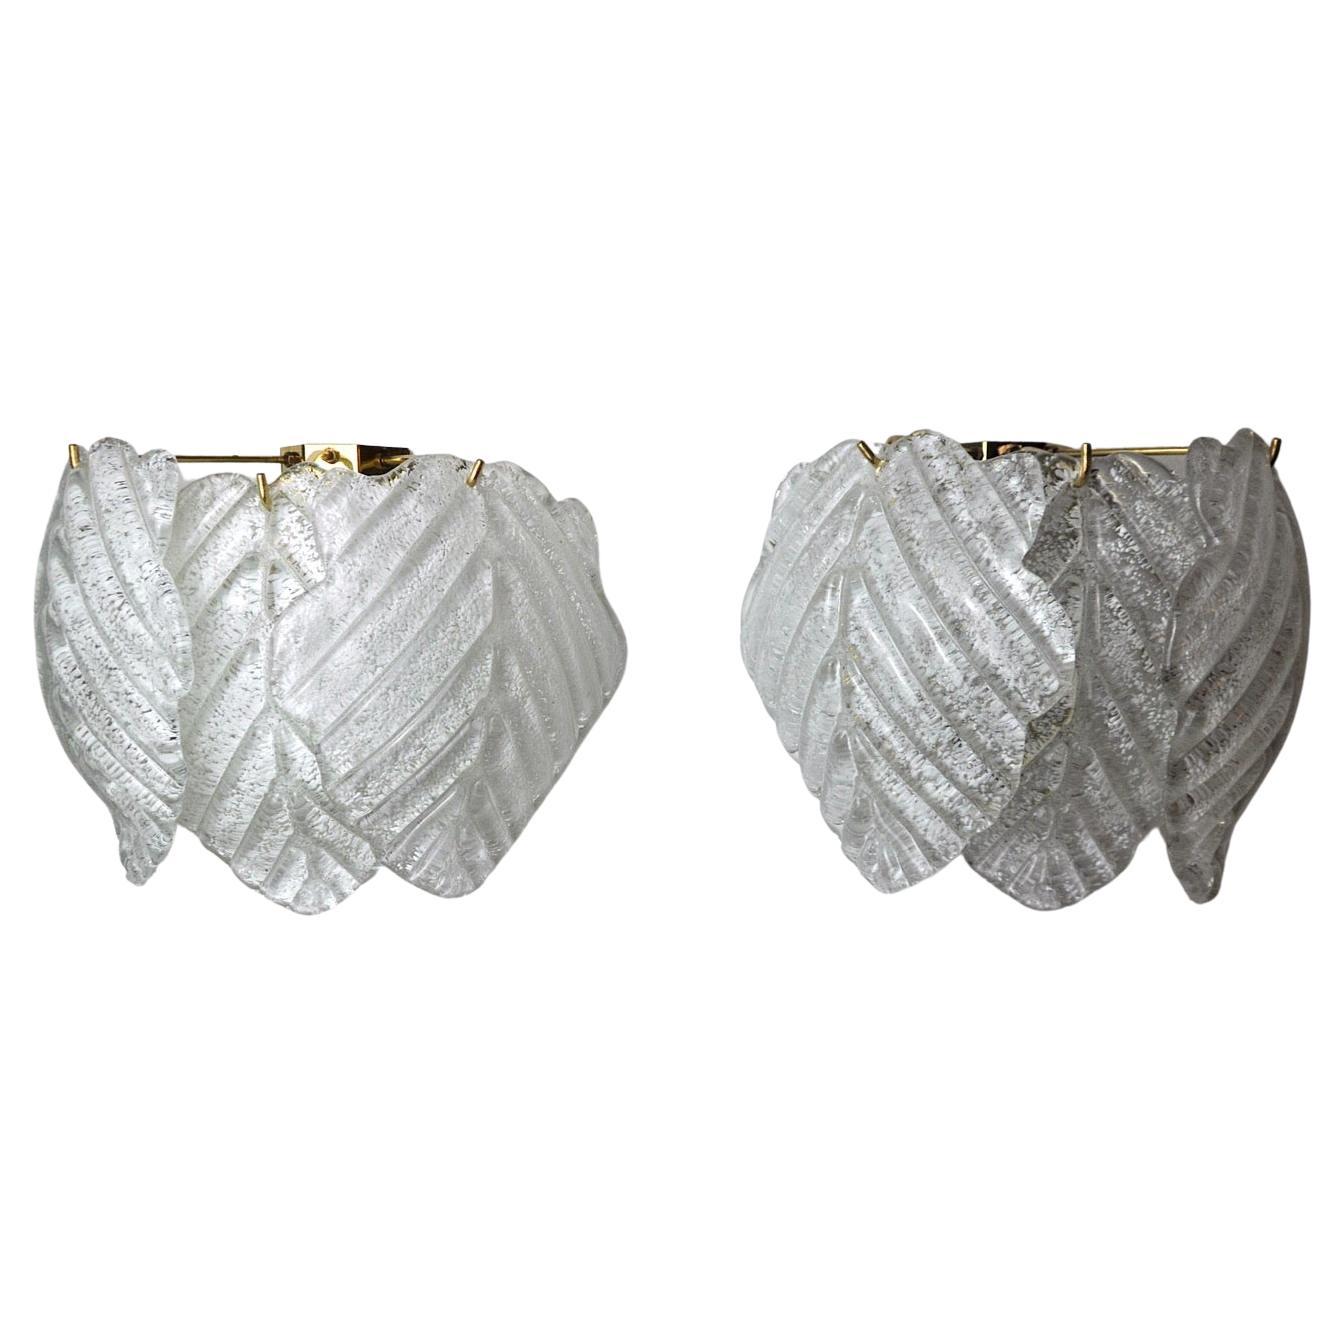 Pair of "Leaves" Sconces by Murano Mazzega, Frosted Glass, Italy, 1970